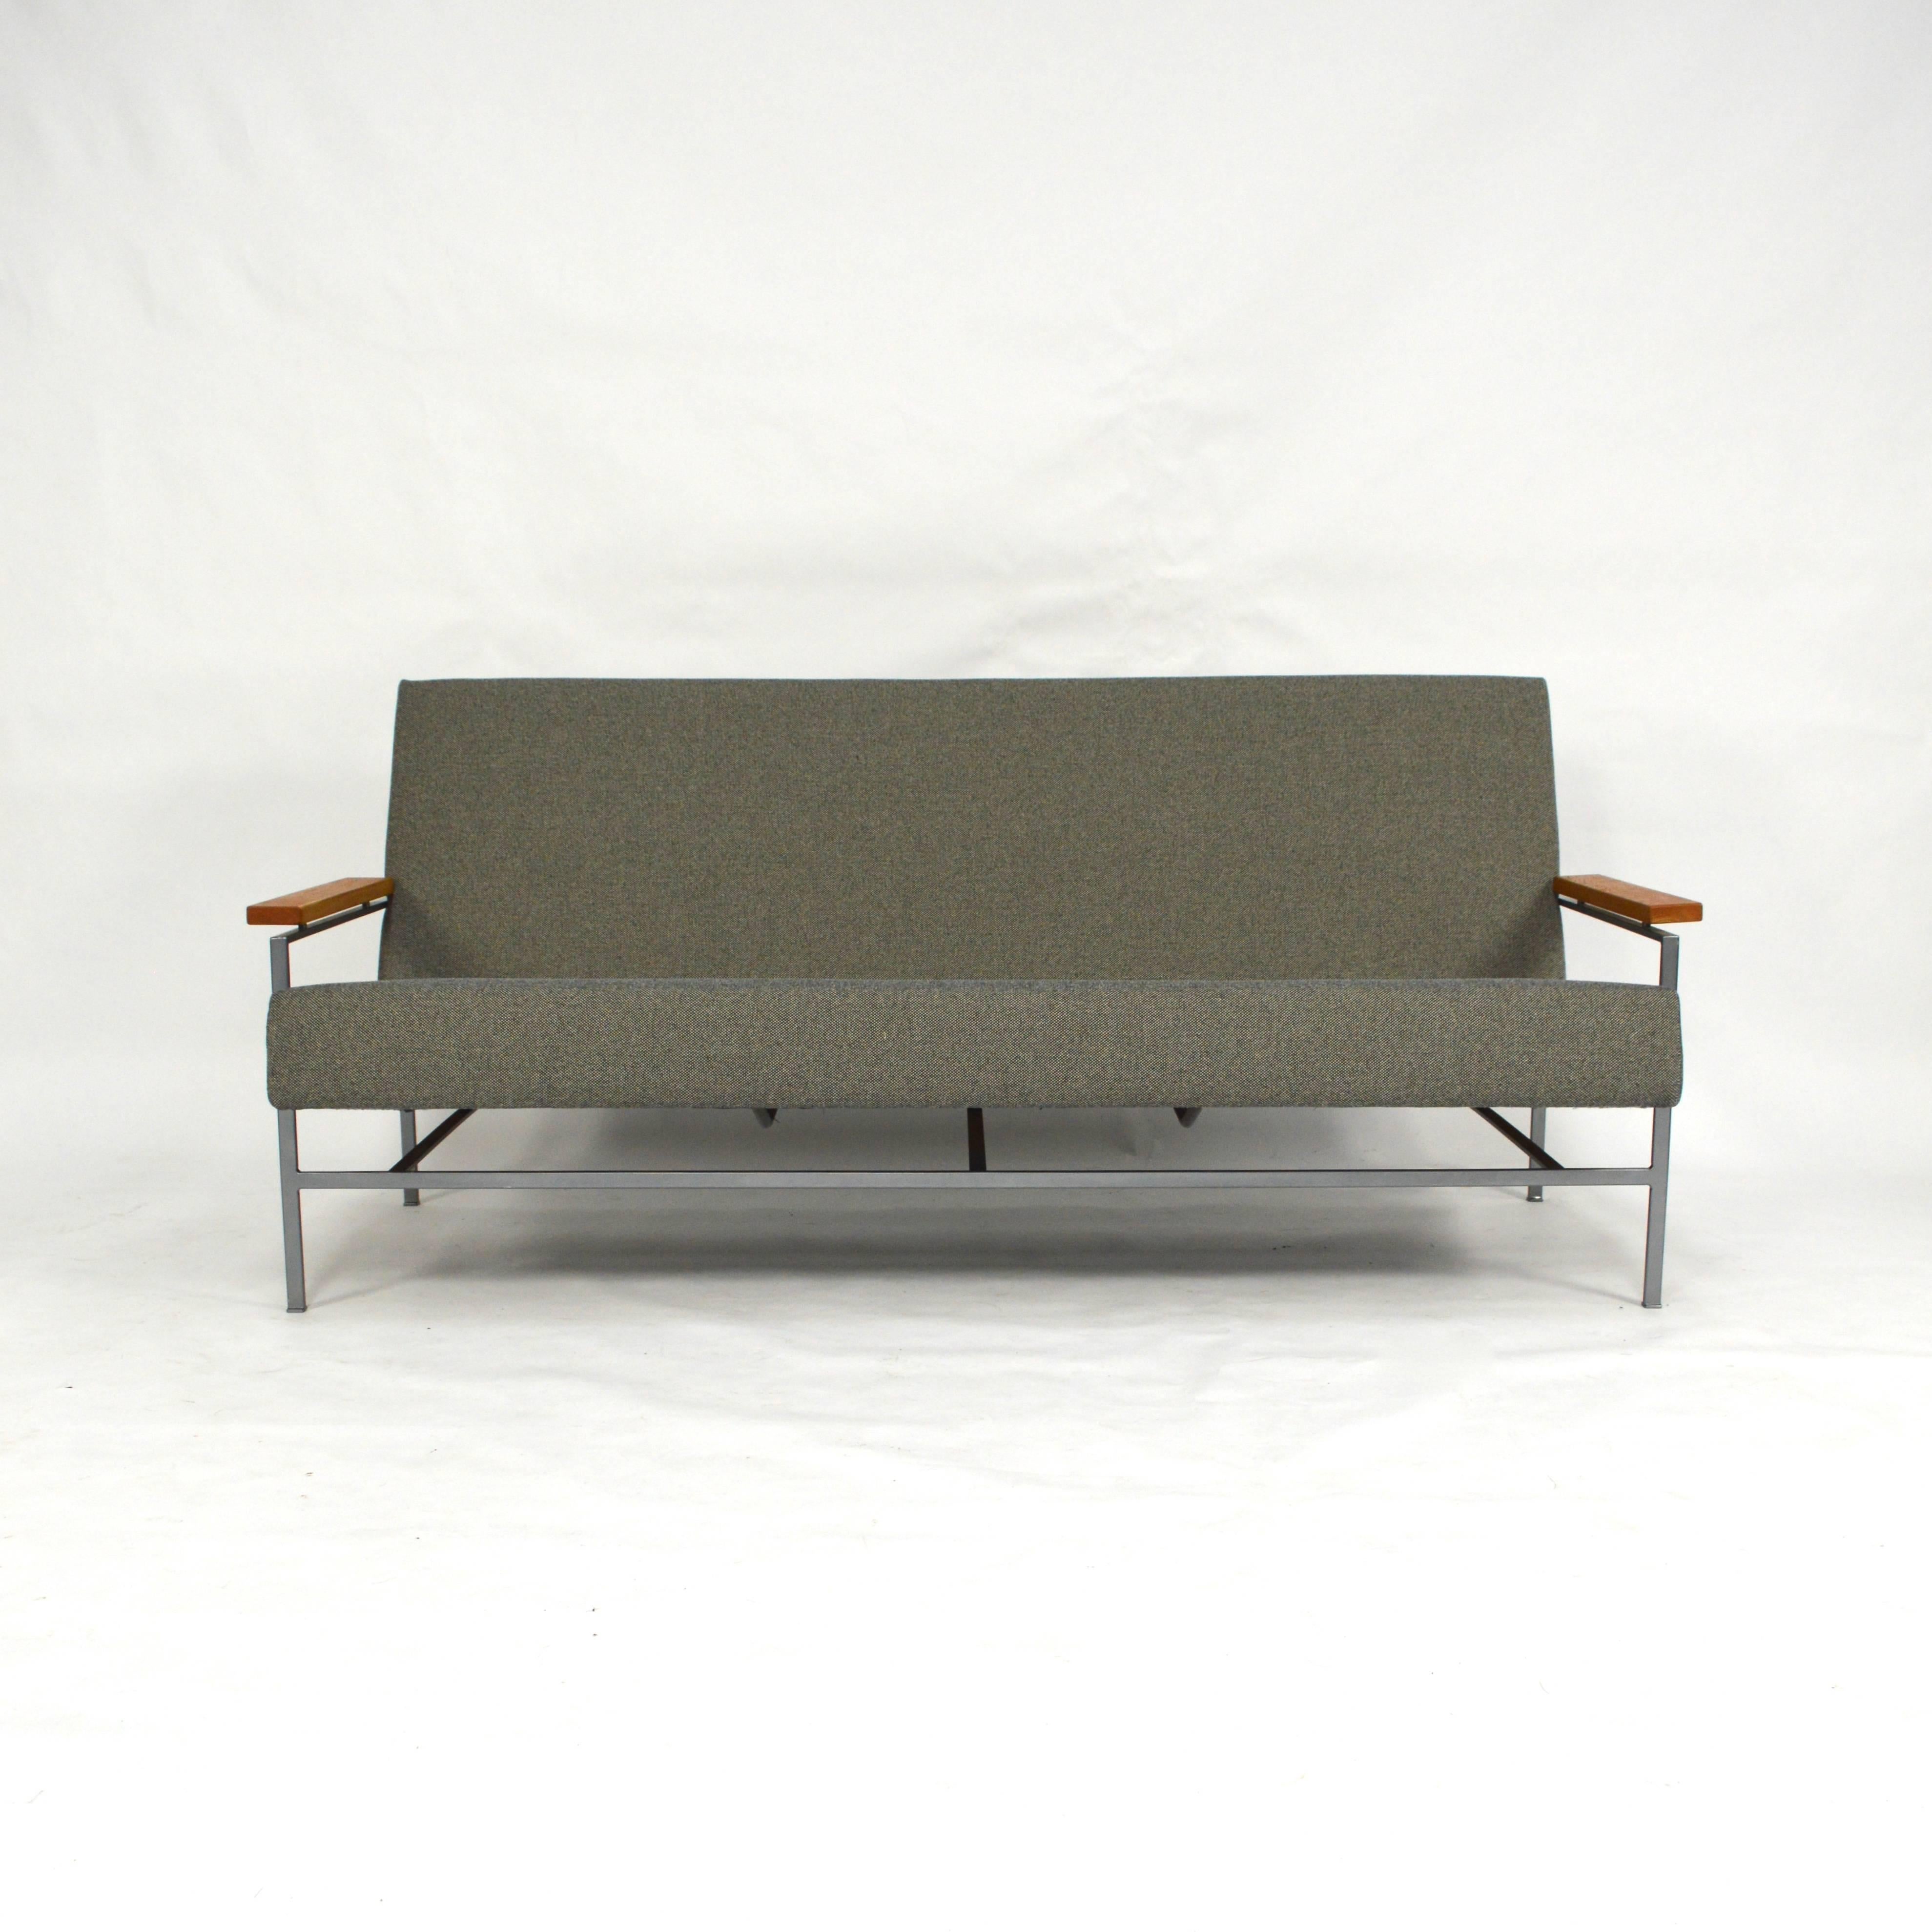 Mid-Century Modern Reupholstered Sofa by Rob Parry for Gelderland, 1950s